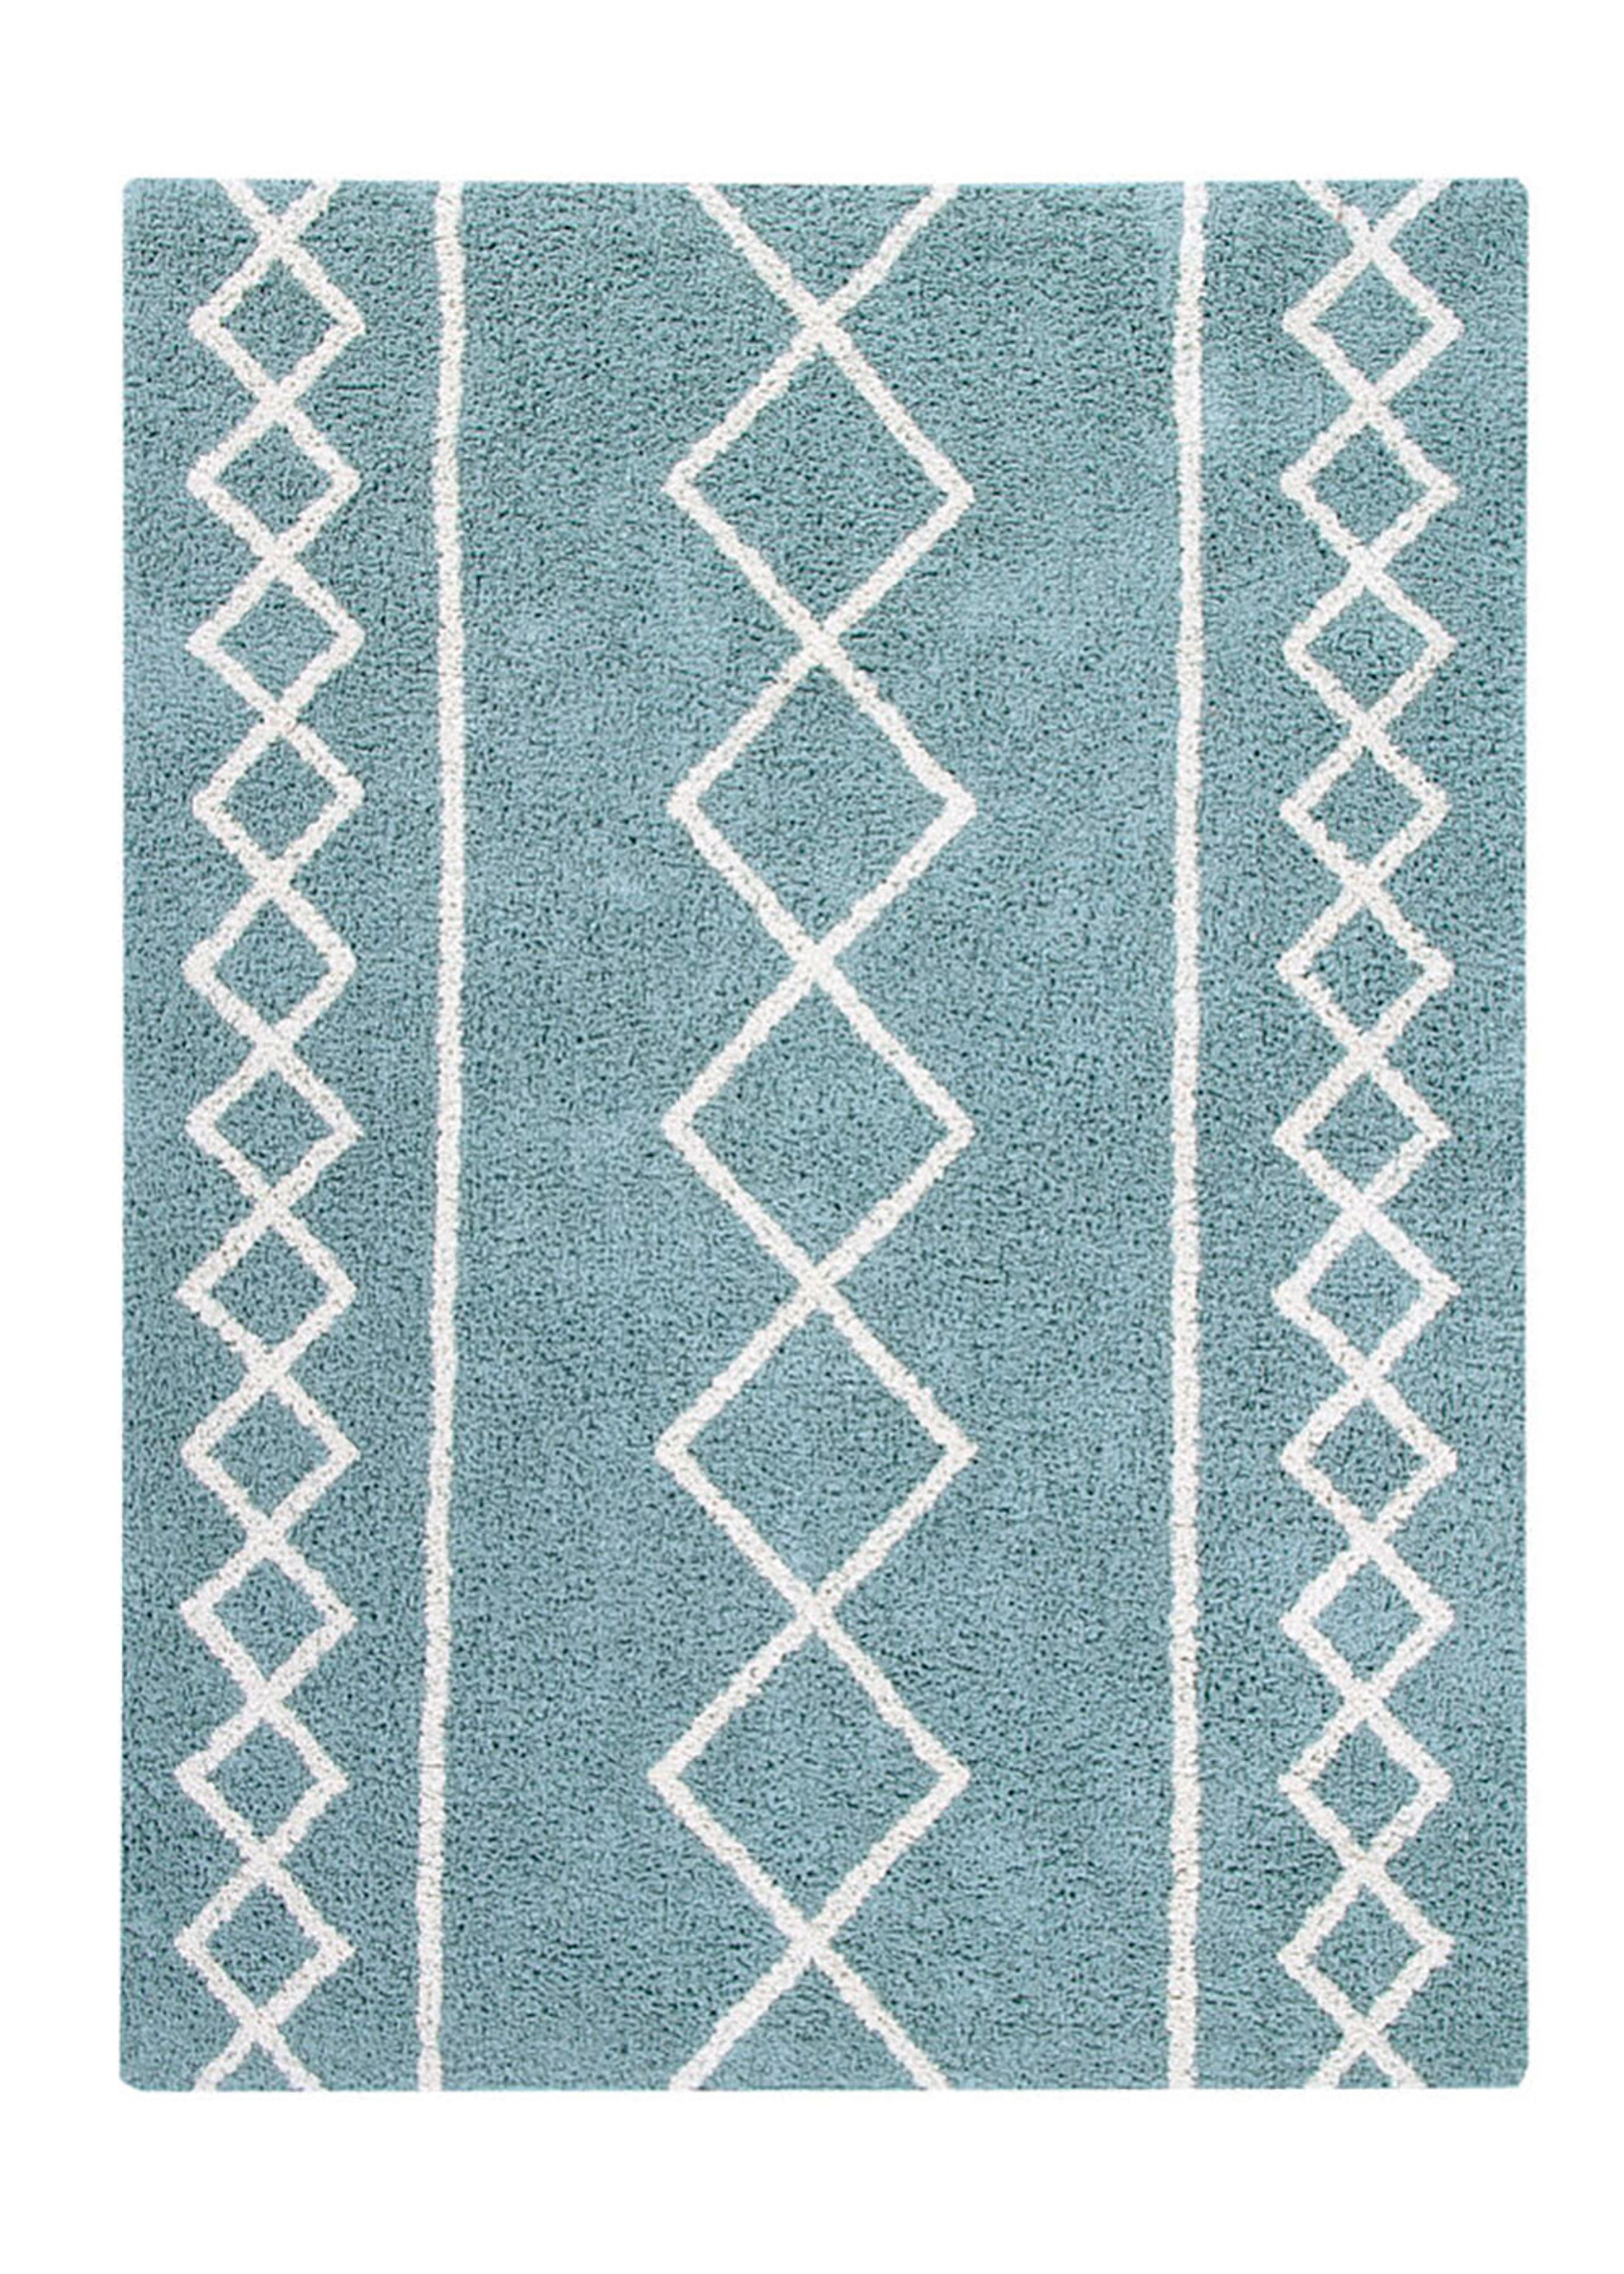 Lorena Canals - Tapete - Washable Rug Oasis - Blue / Natural